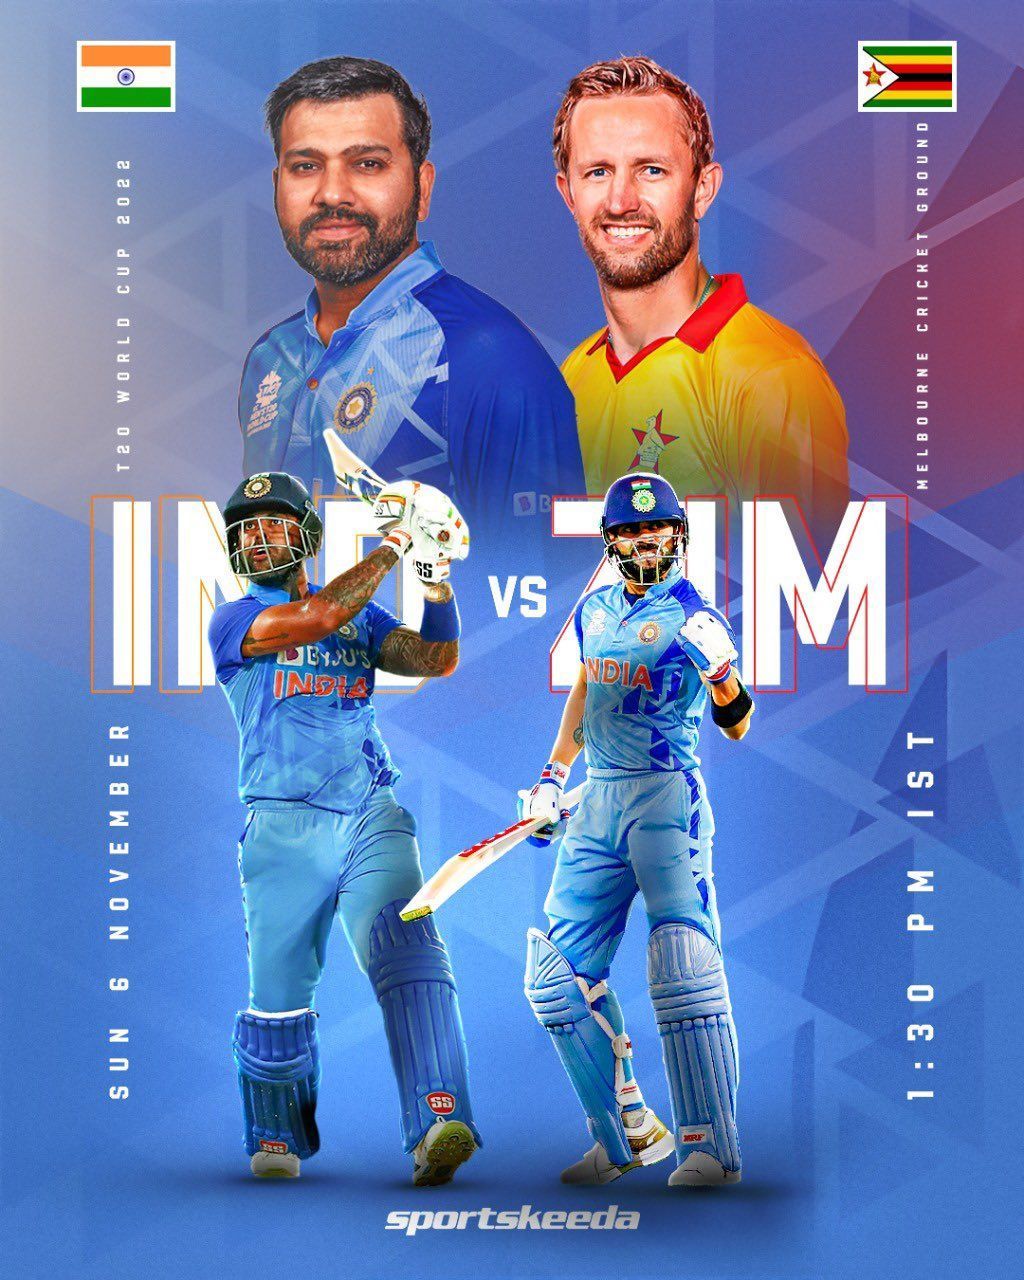 India and Zimbabwe are set to lock horns in Match 42 of the T20 World Cup 2022 [Pic Credit: Sportskeeda]